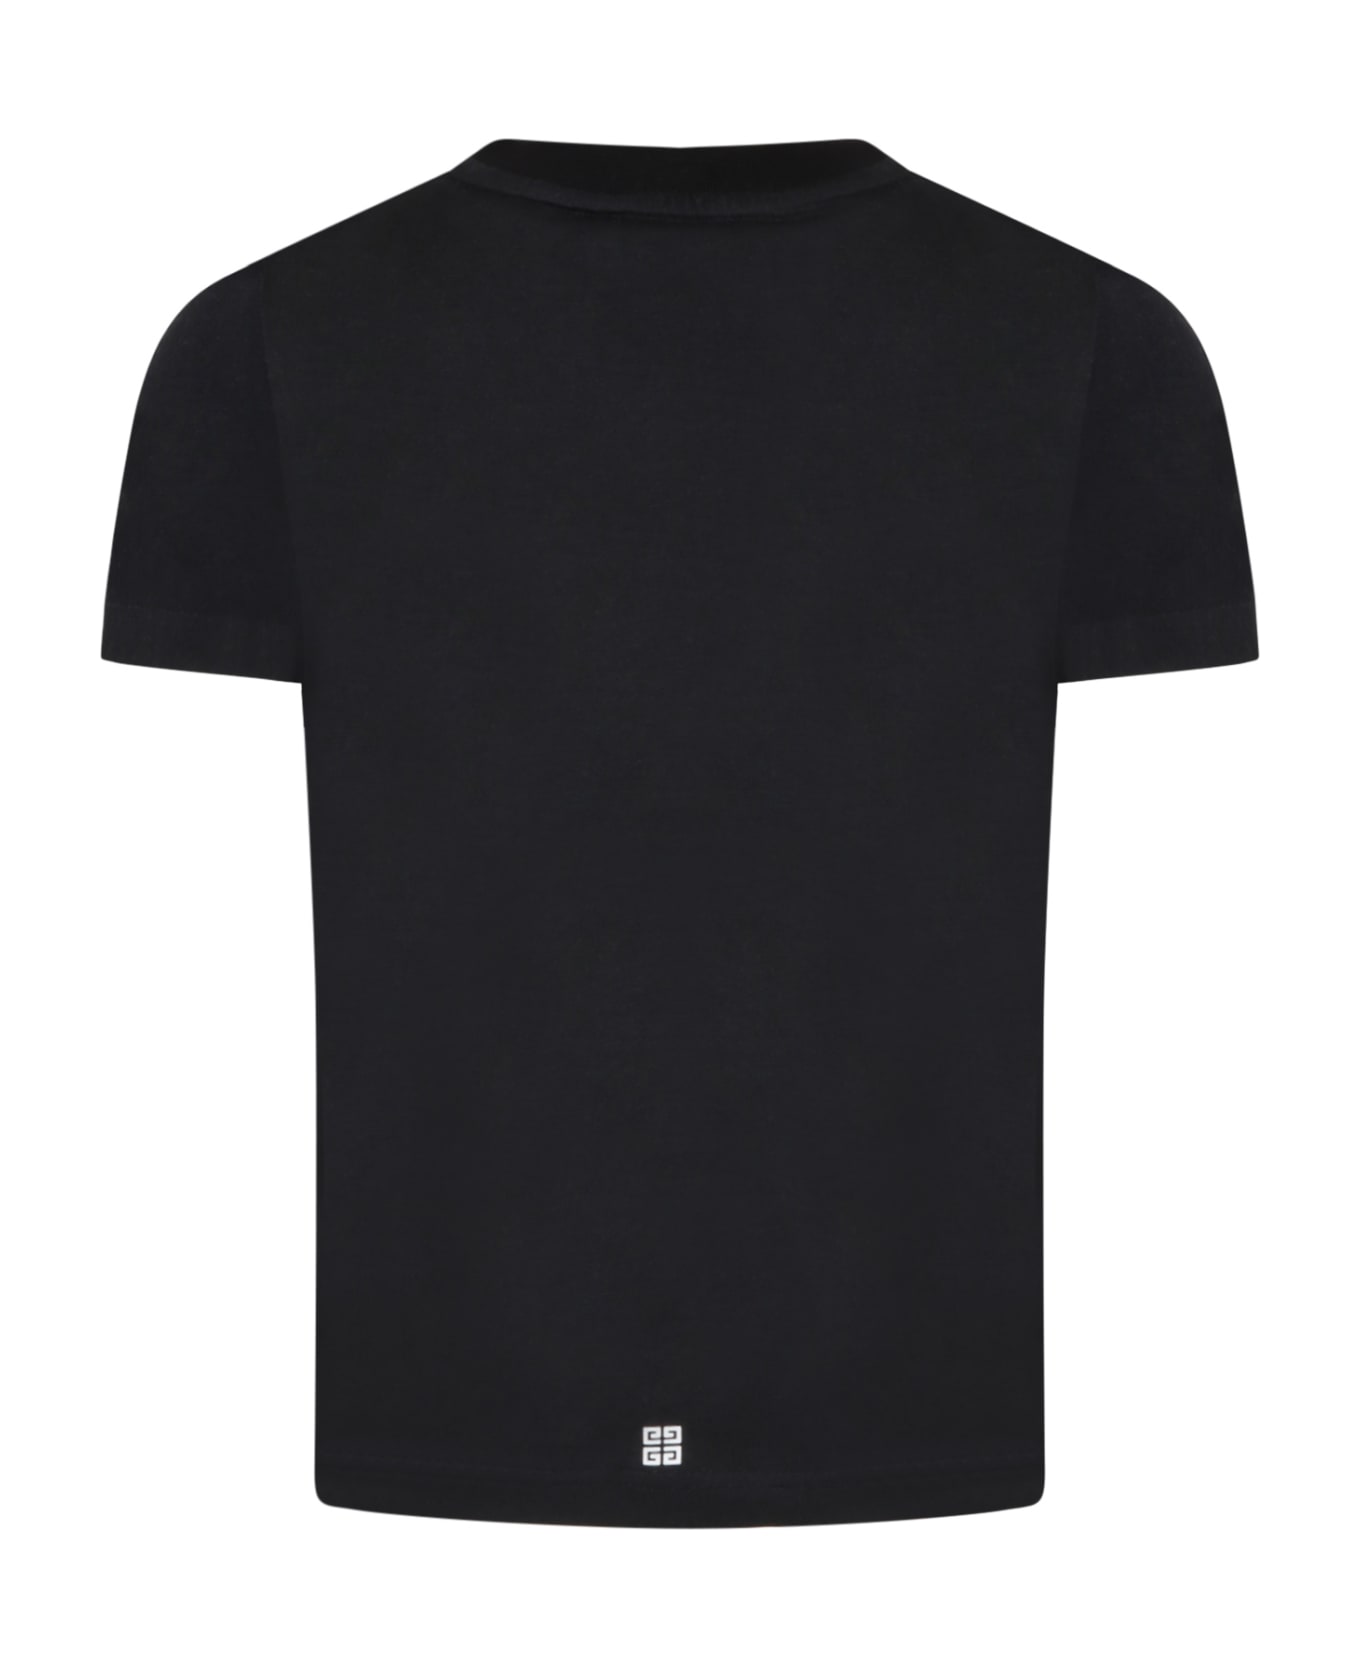 Givenchy Black T-shirt For Kids With Logo - Black